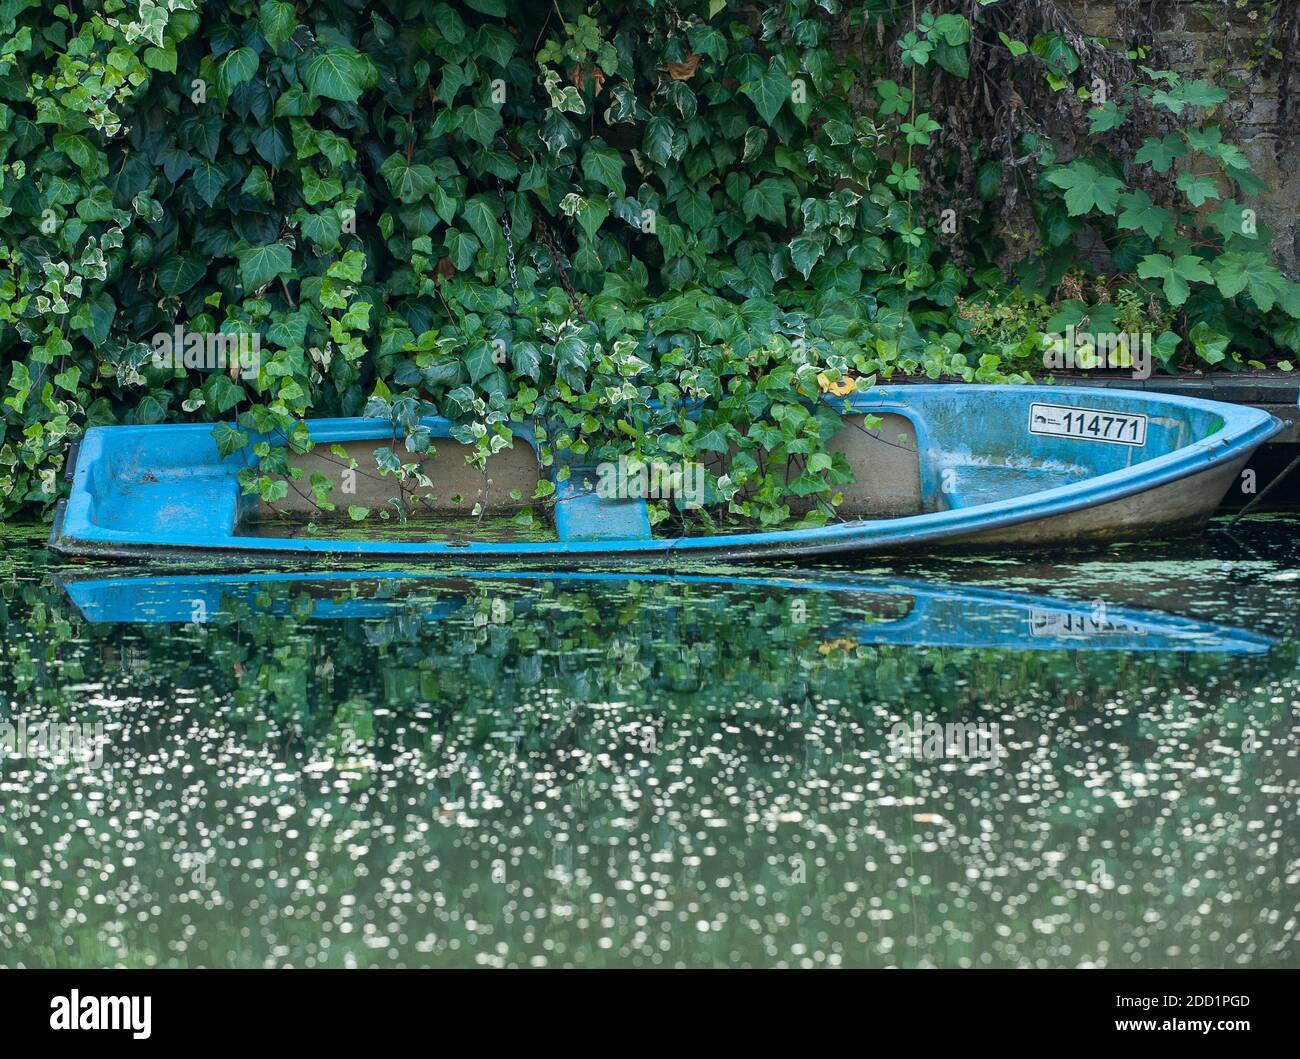 Blue canal boat partially submerged in Regents Canal in London, UK. Stock Photo